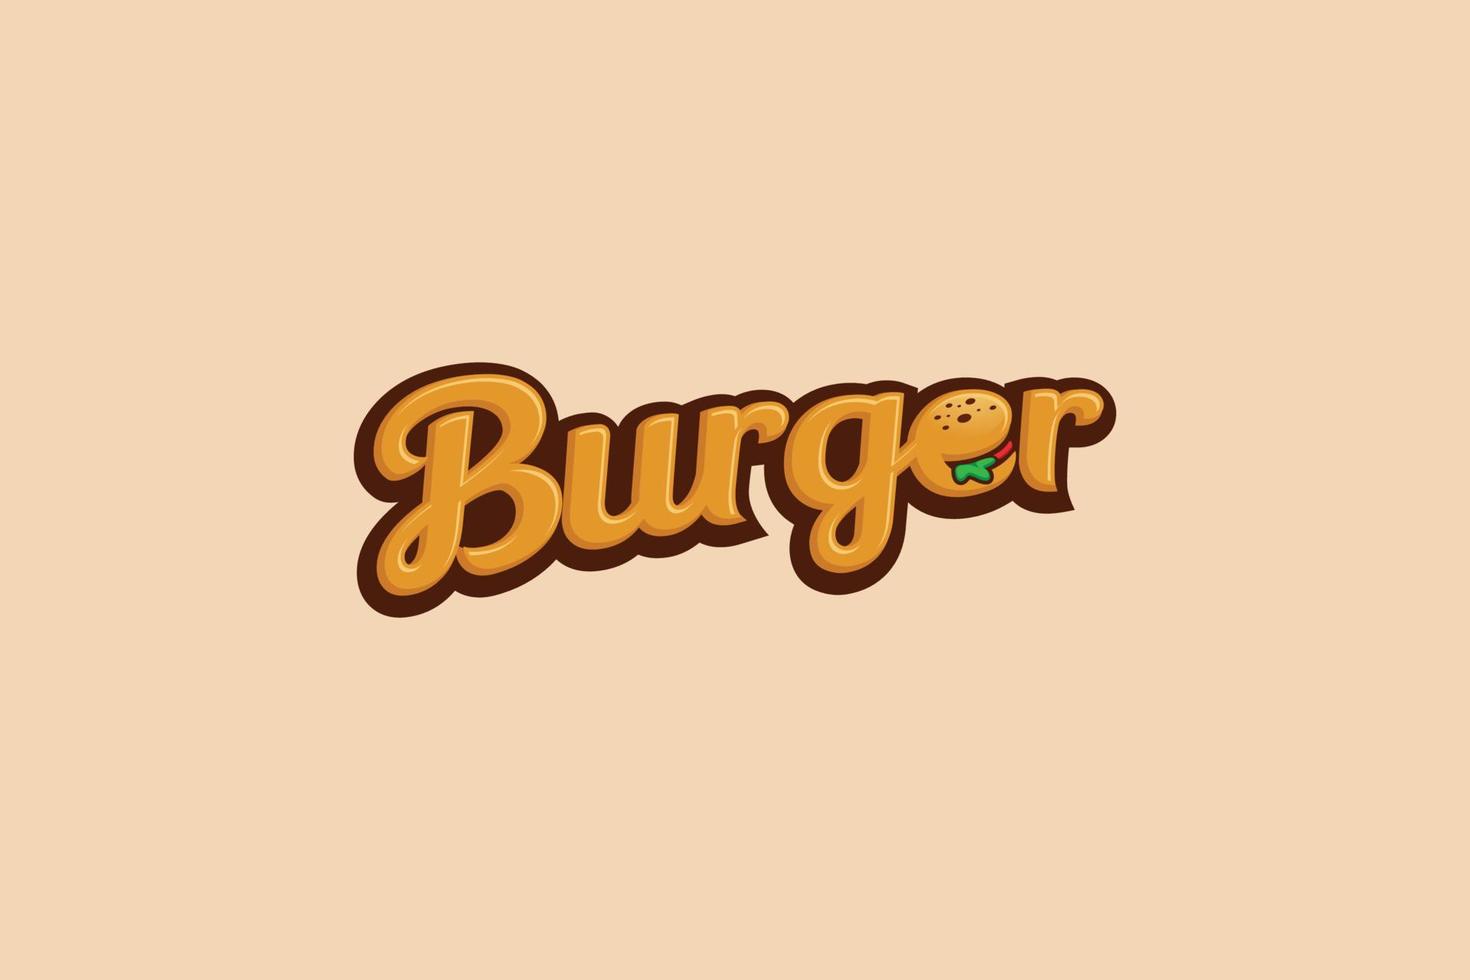 simple burger logo with letter e modified like burger. vector